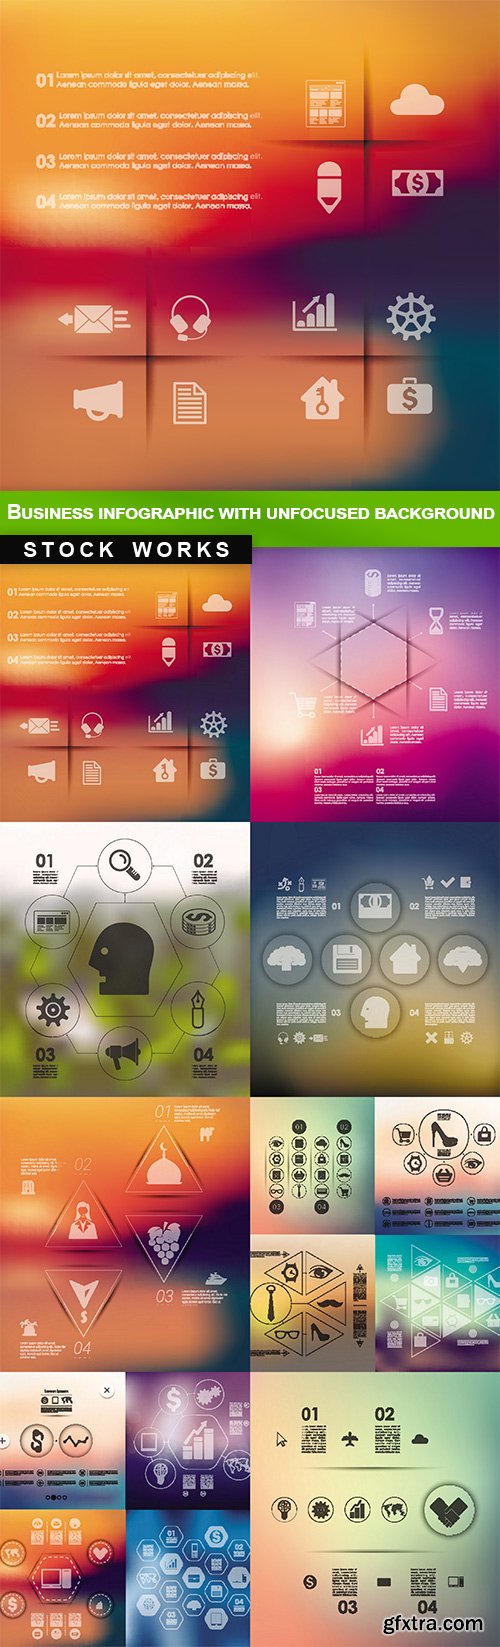 Business infographic with unfocused background - 8 EPS